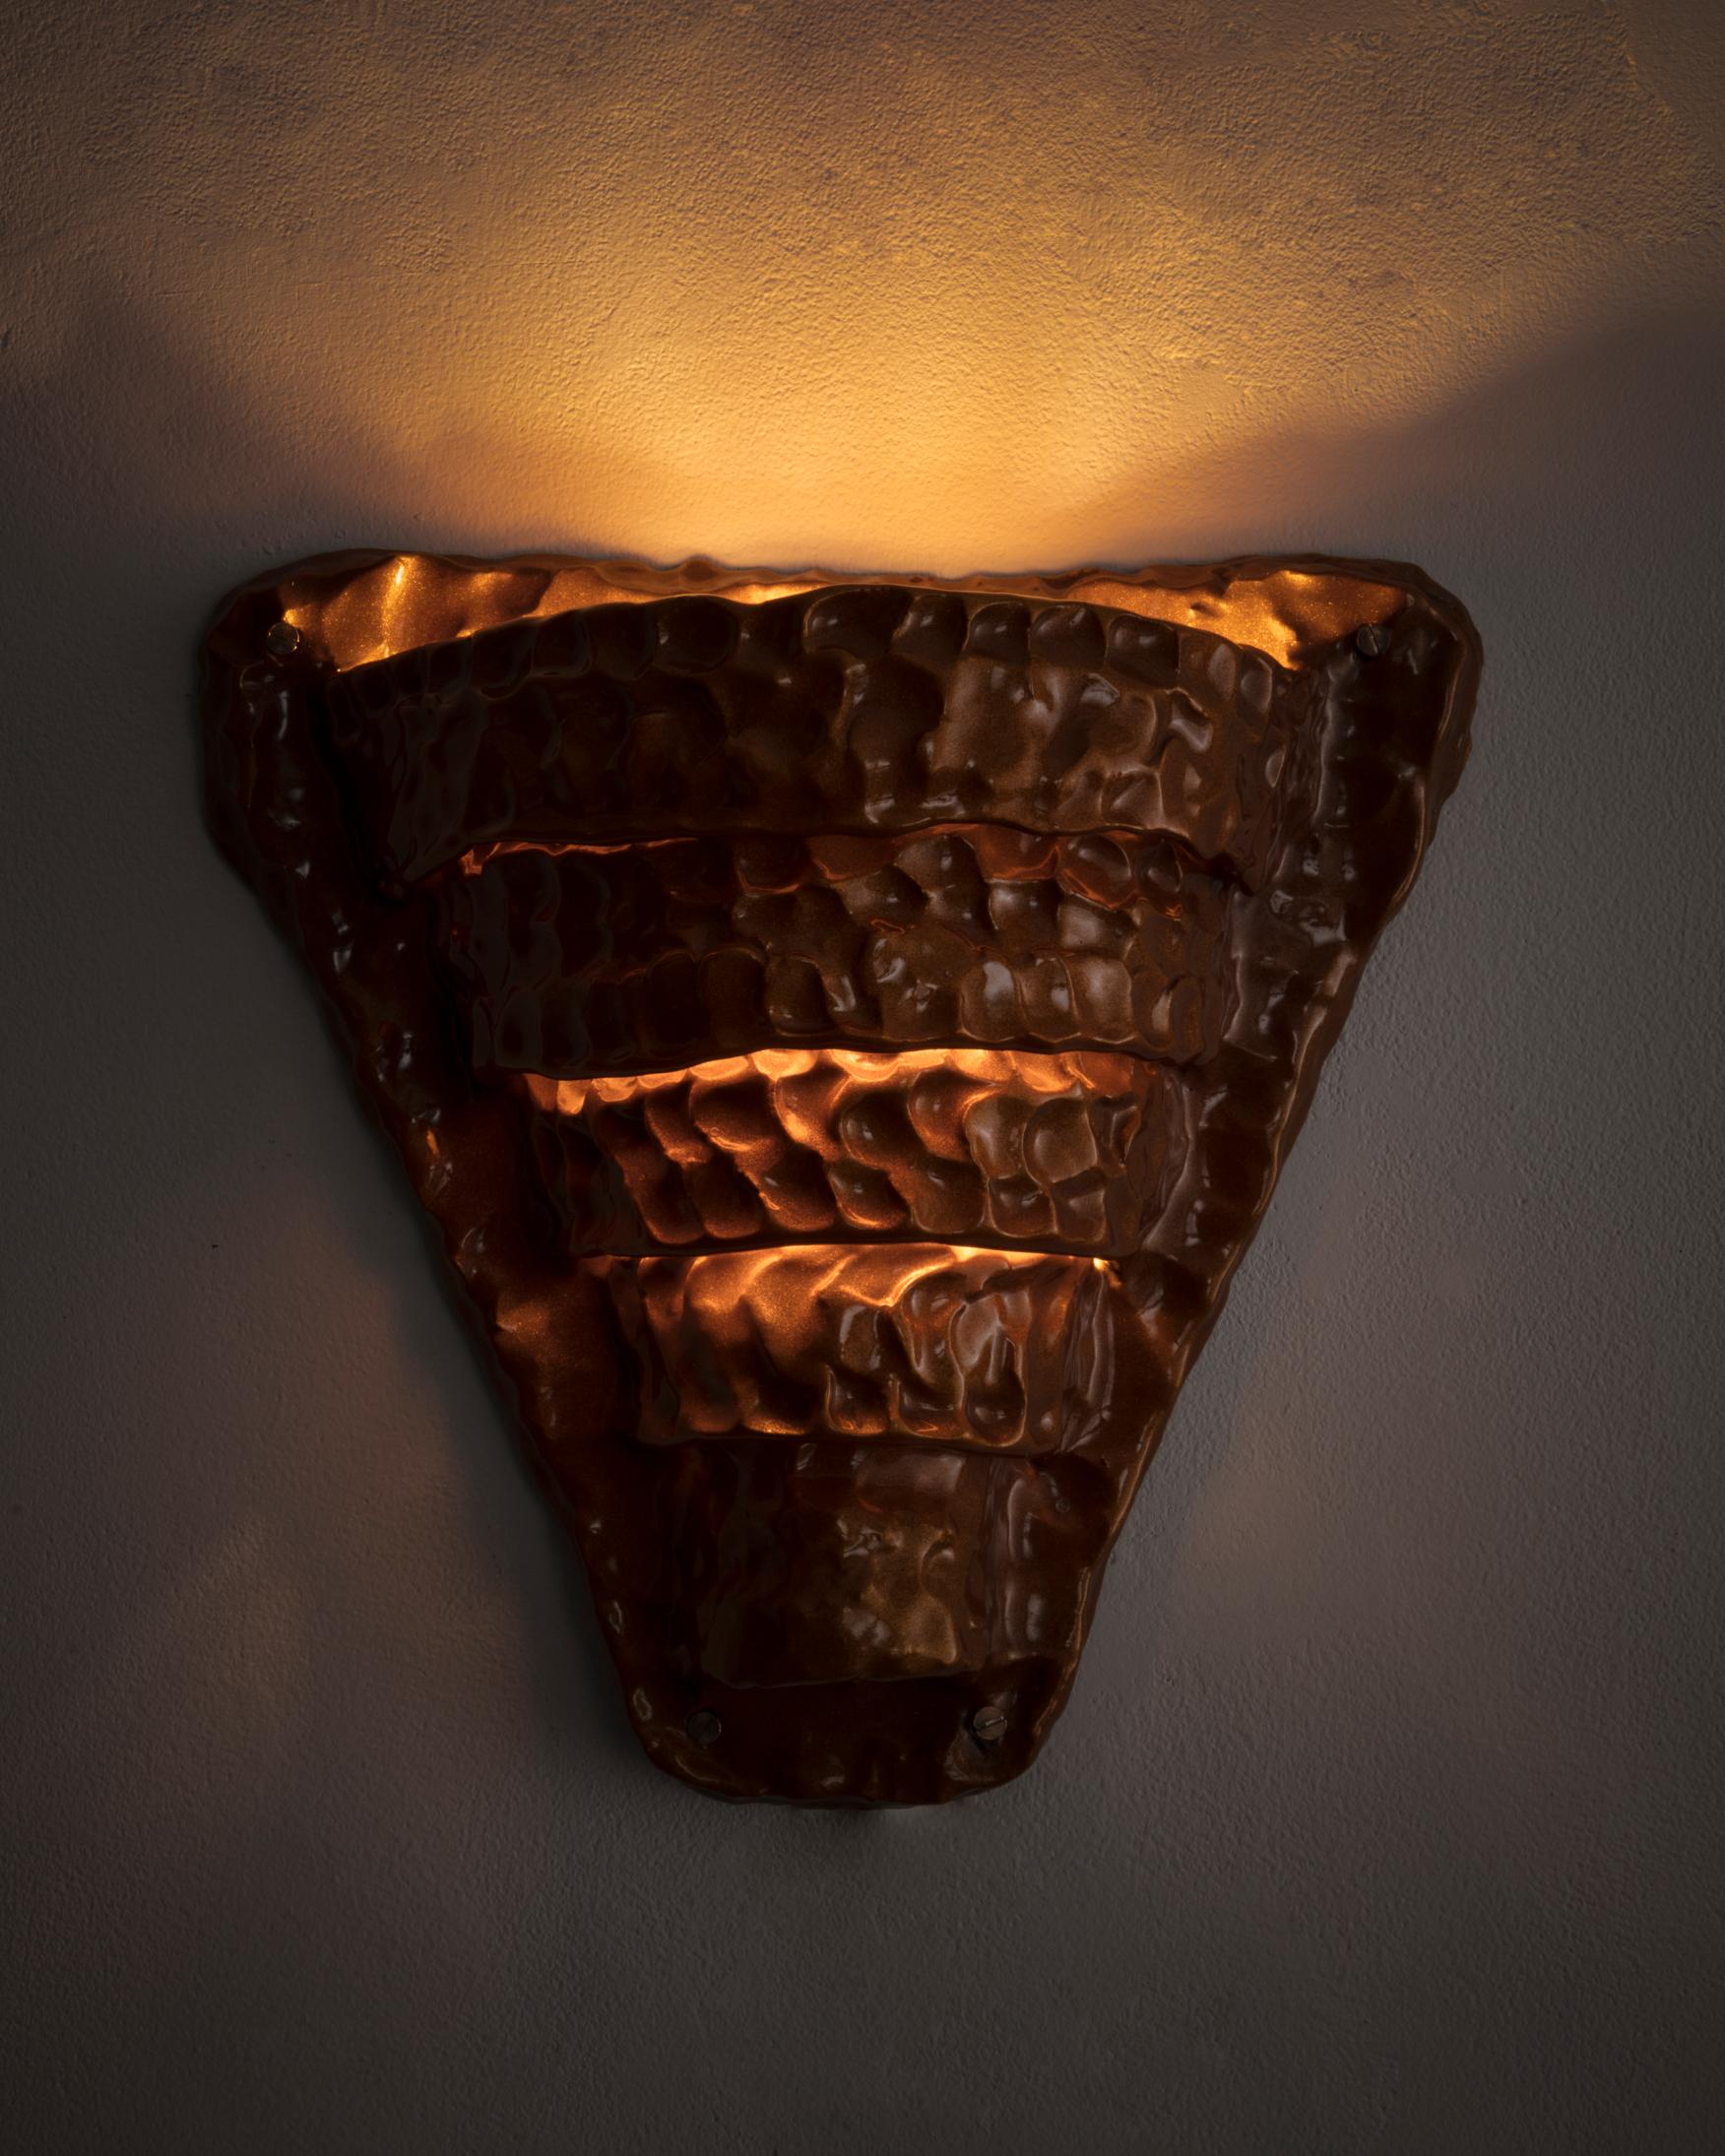 Modern Caramel Wall Sconce in Hand Painted Ceramic by Katie Stout, 2017